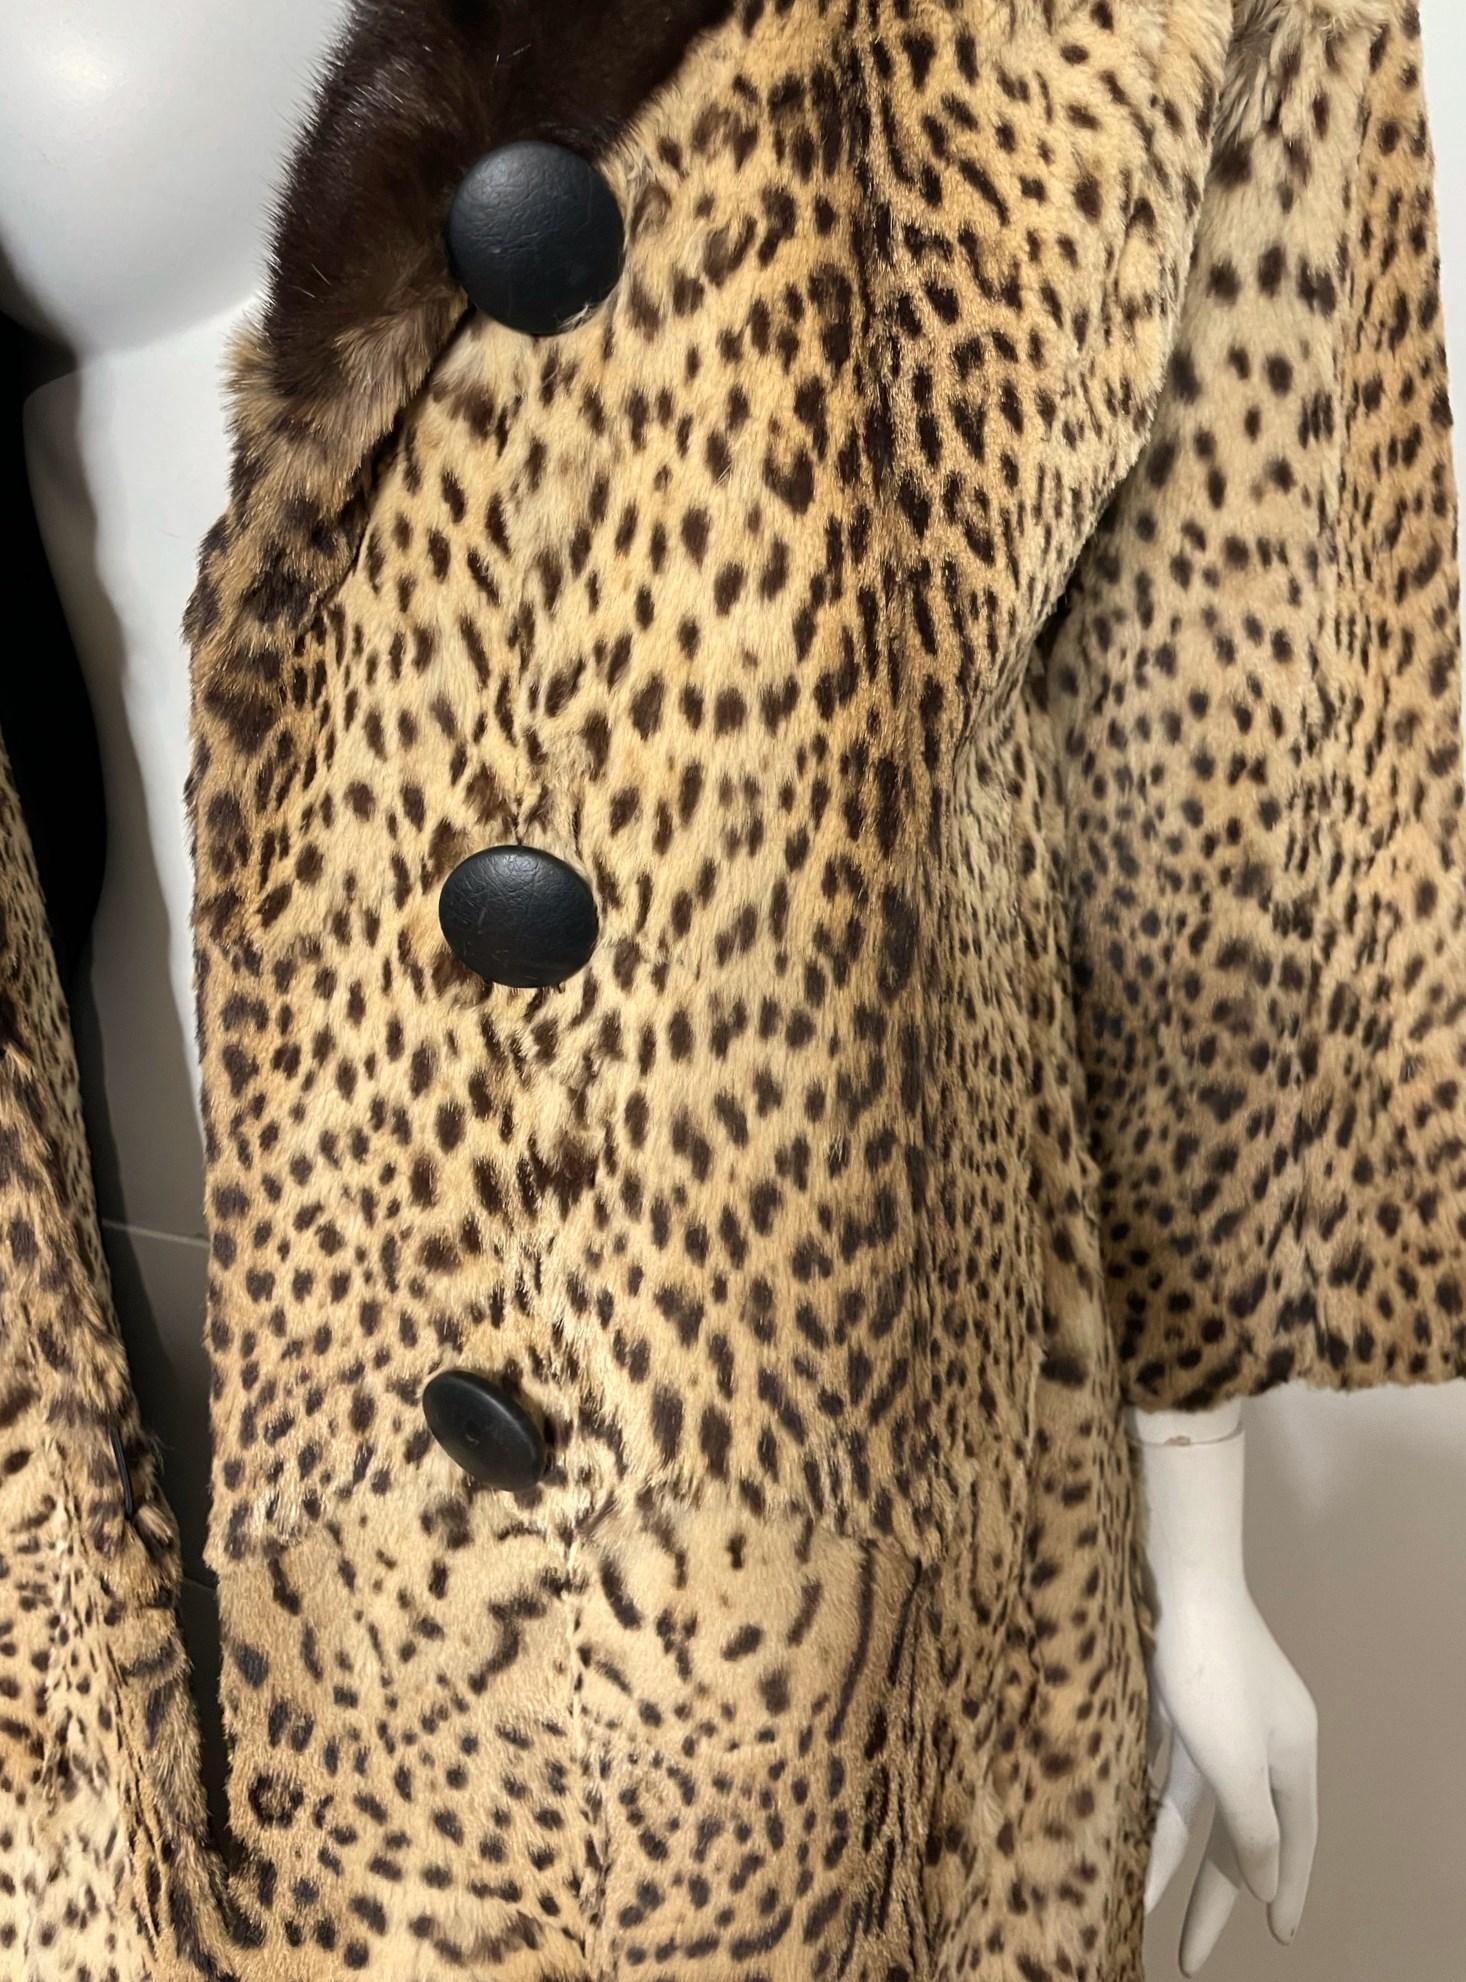 Vintage Cat Printed Fur Jacket - Swing Coat In Good Condition For Sale In Wallkill, NY